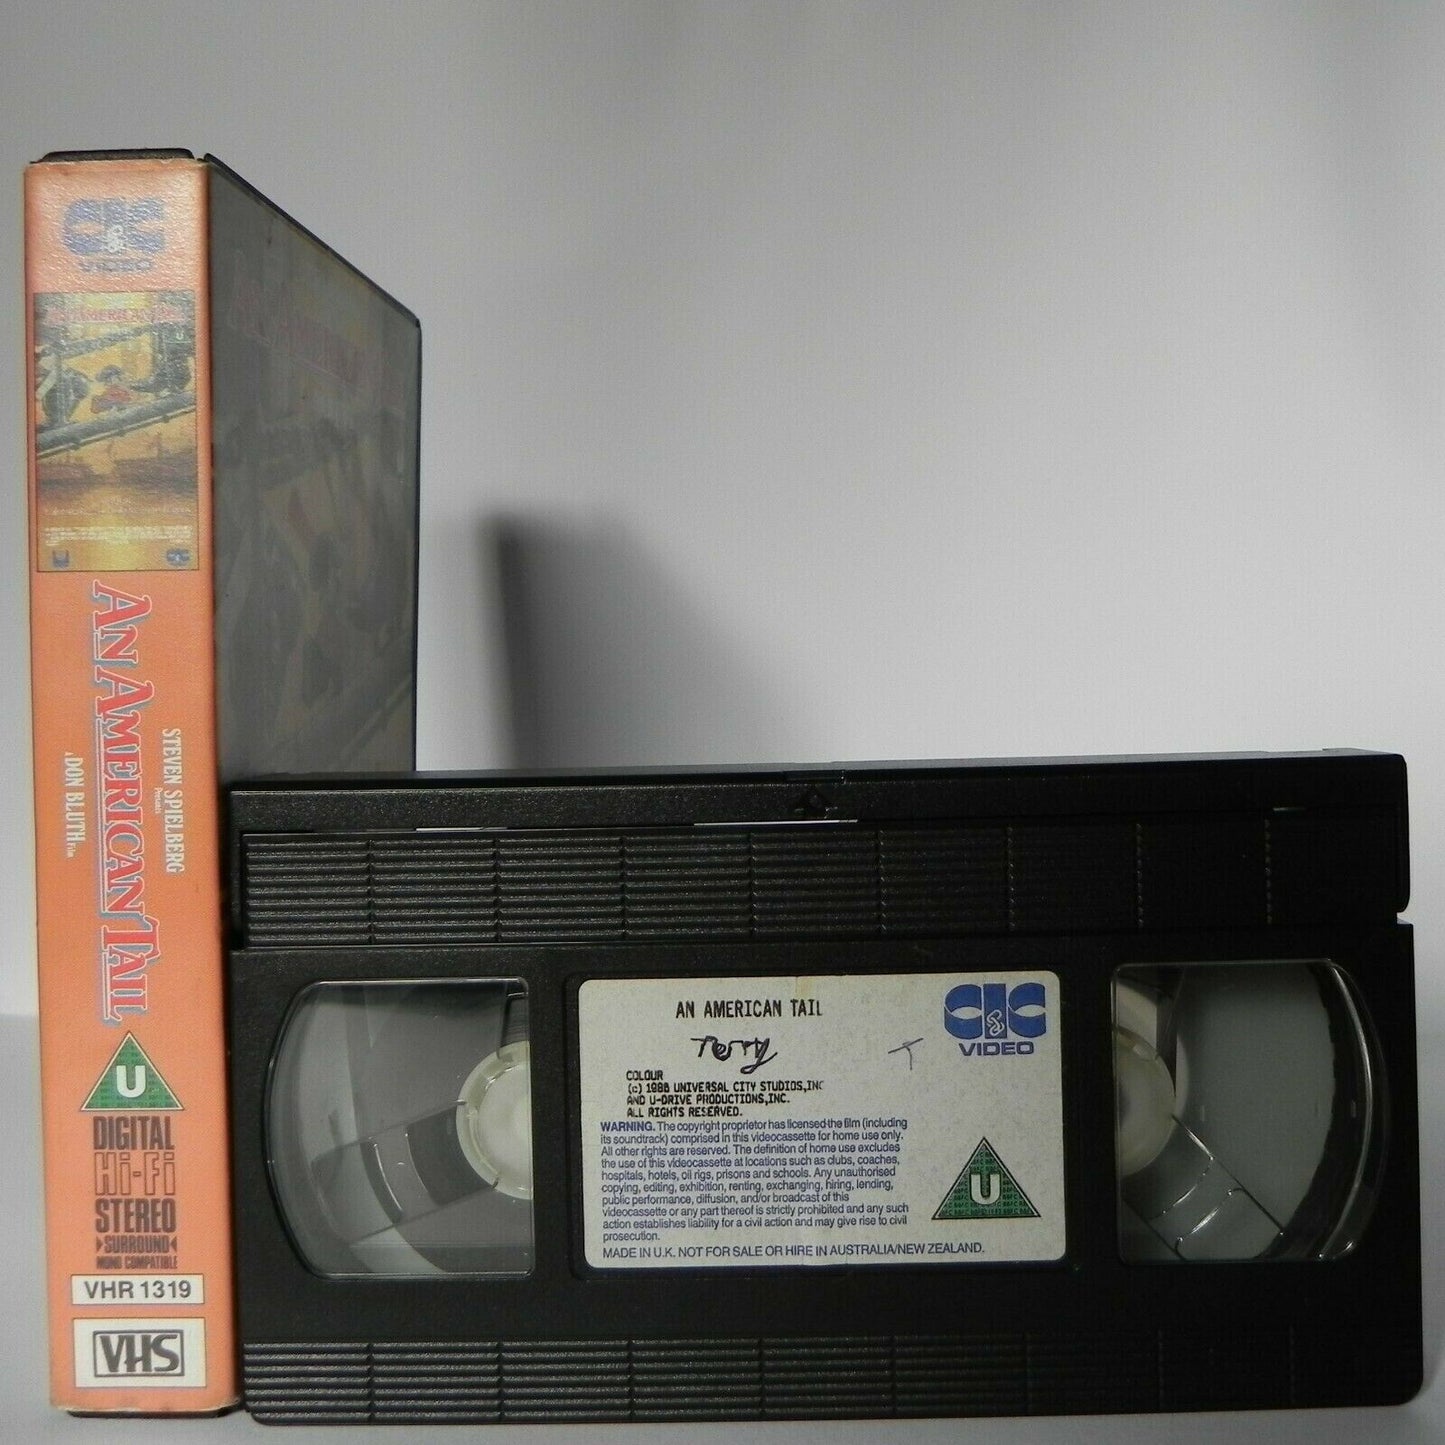 An American Tail - (1986) - Classic - Animated - Adventures - Children's - VHS-